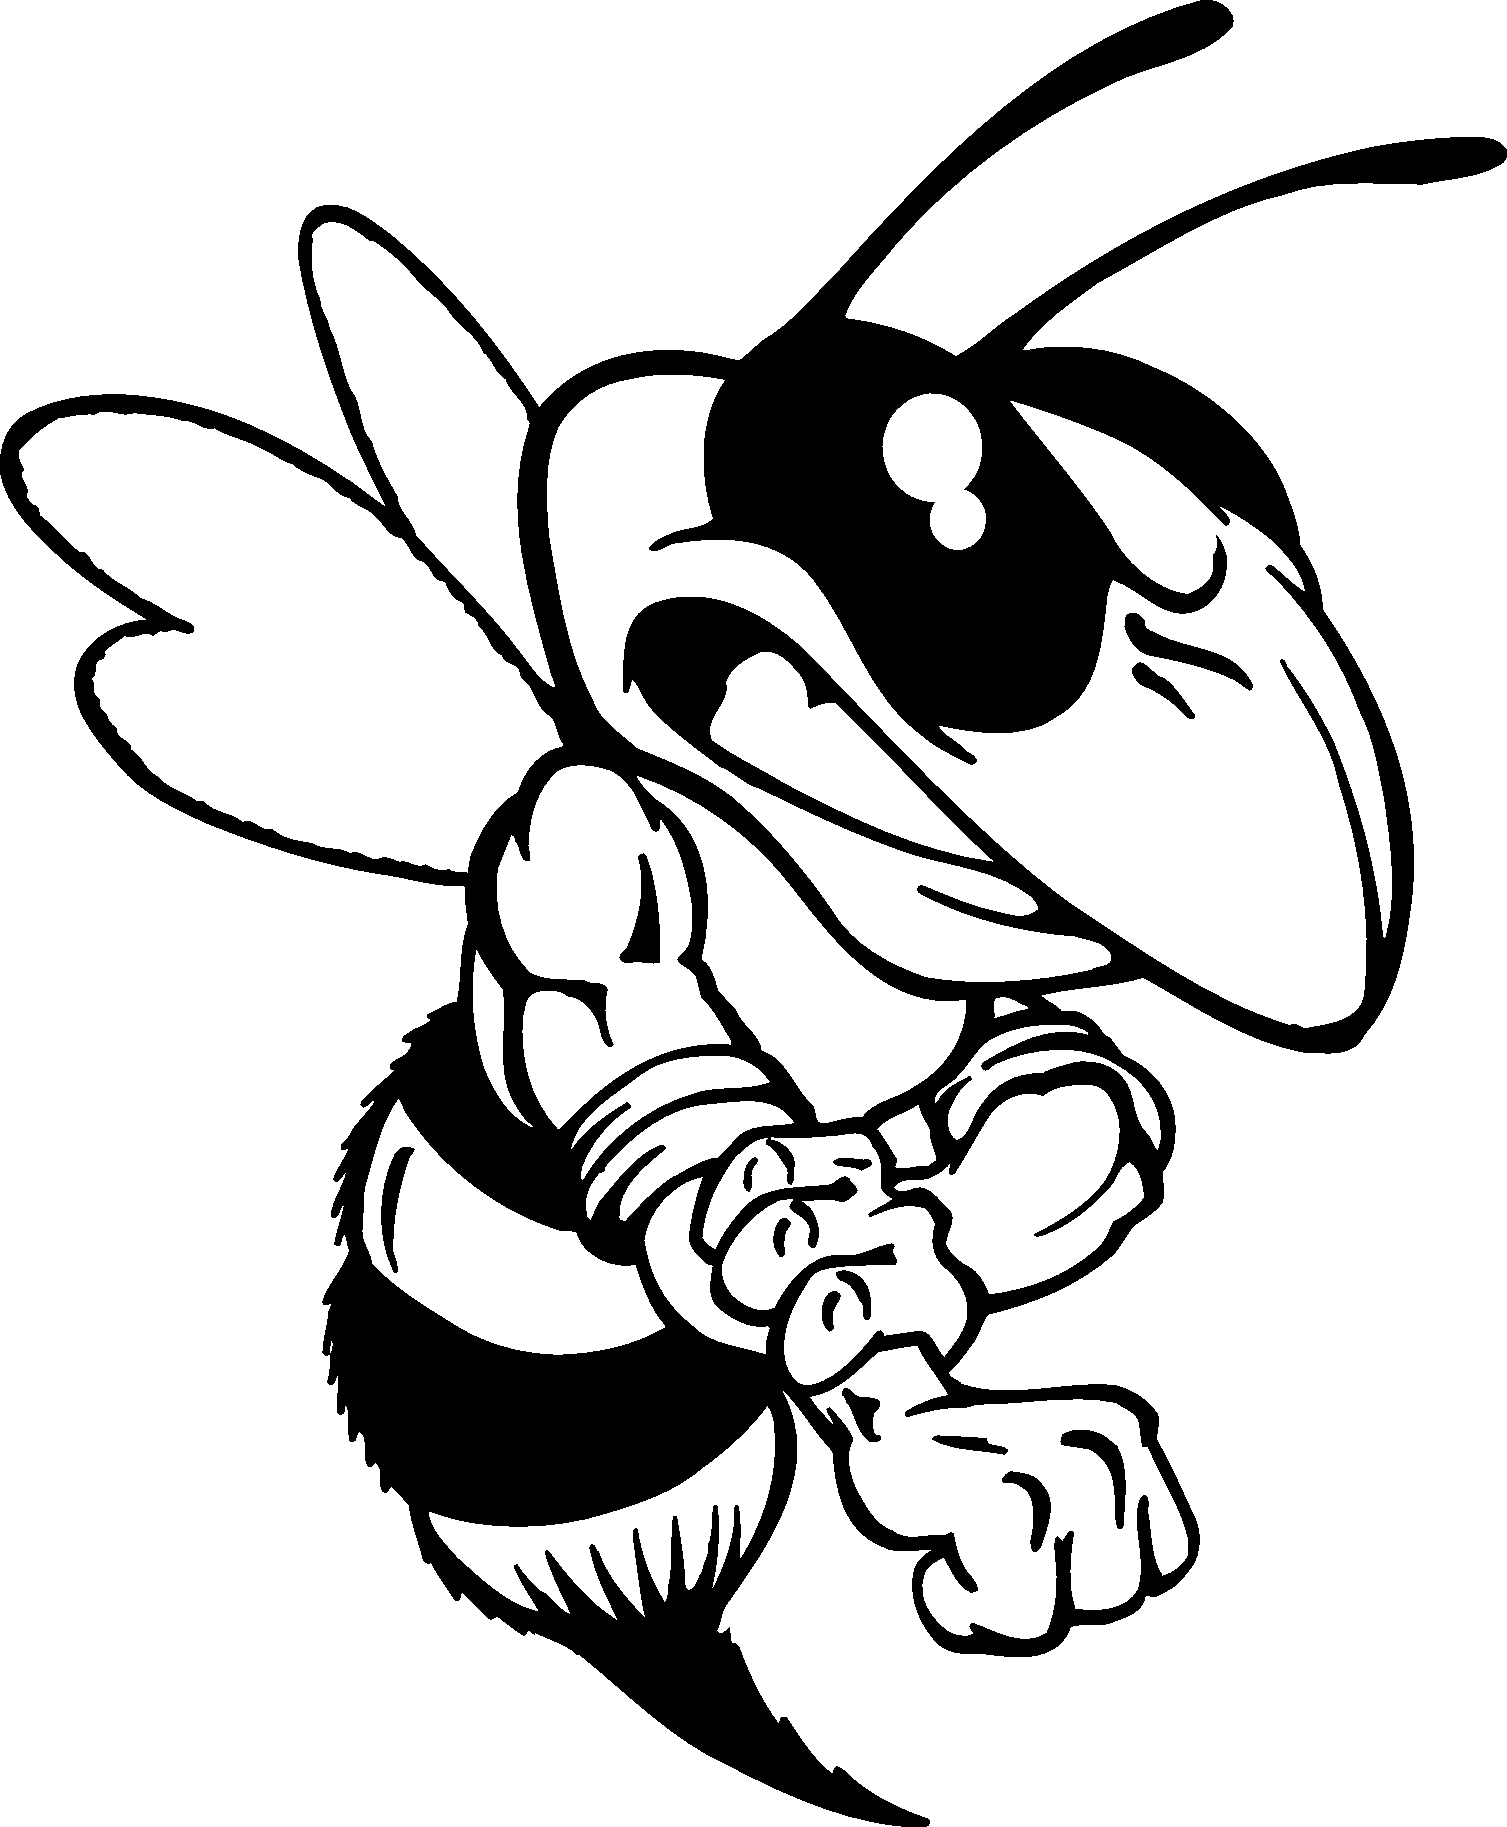 Bee Line Art - Clipart library